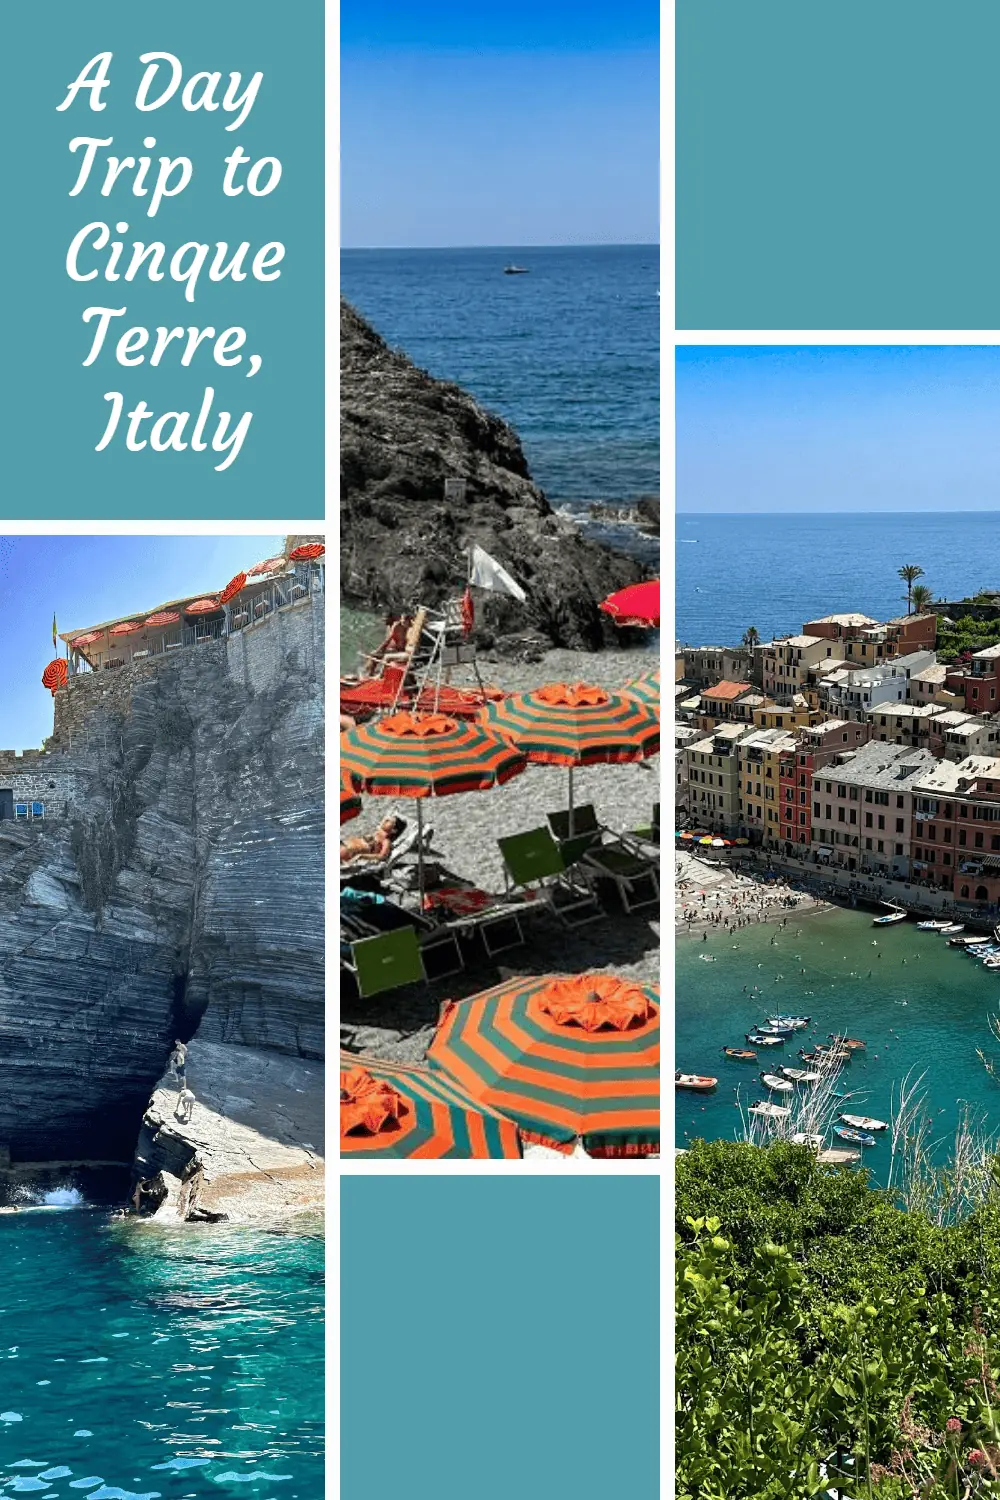 Read on to find out how to get to Cinque Terre, Italy for a day trip and what to do in Cinque Terre in one day. #Italydaytrips #Italytravel